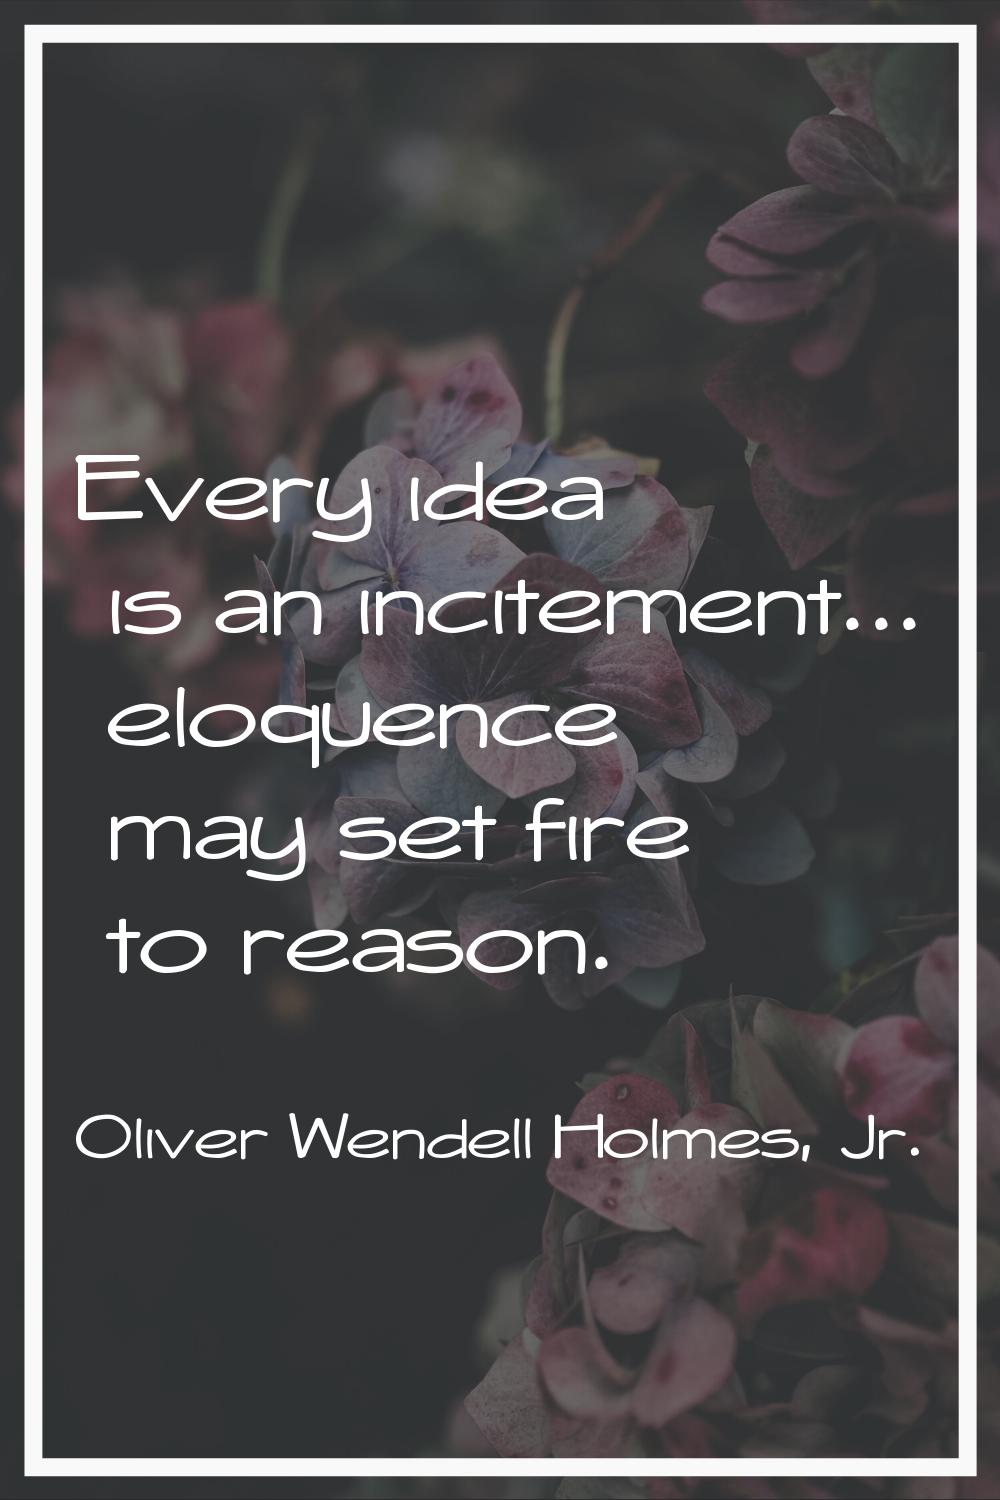 Every idea is an incitement... eloquence may set fire to reason.